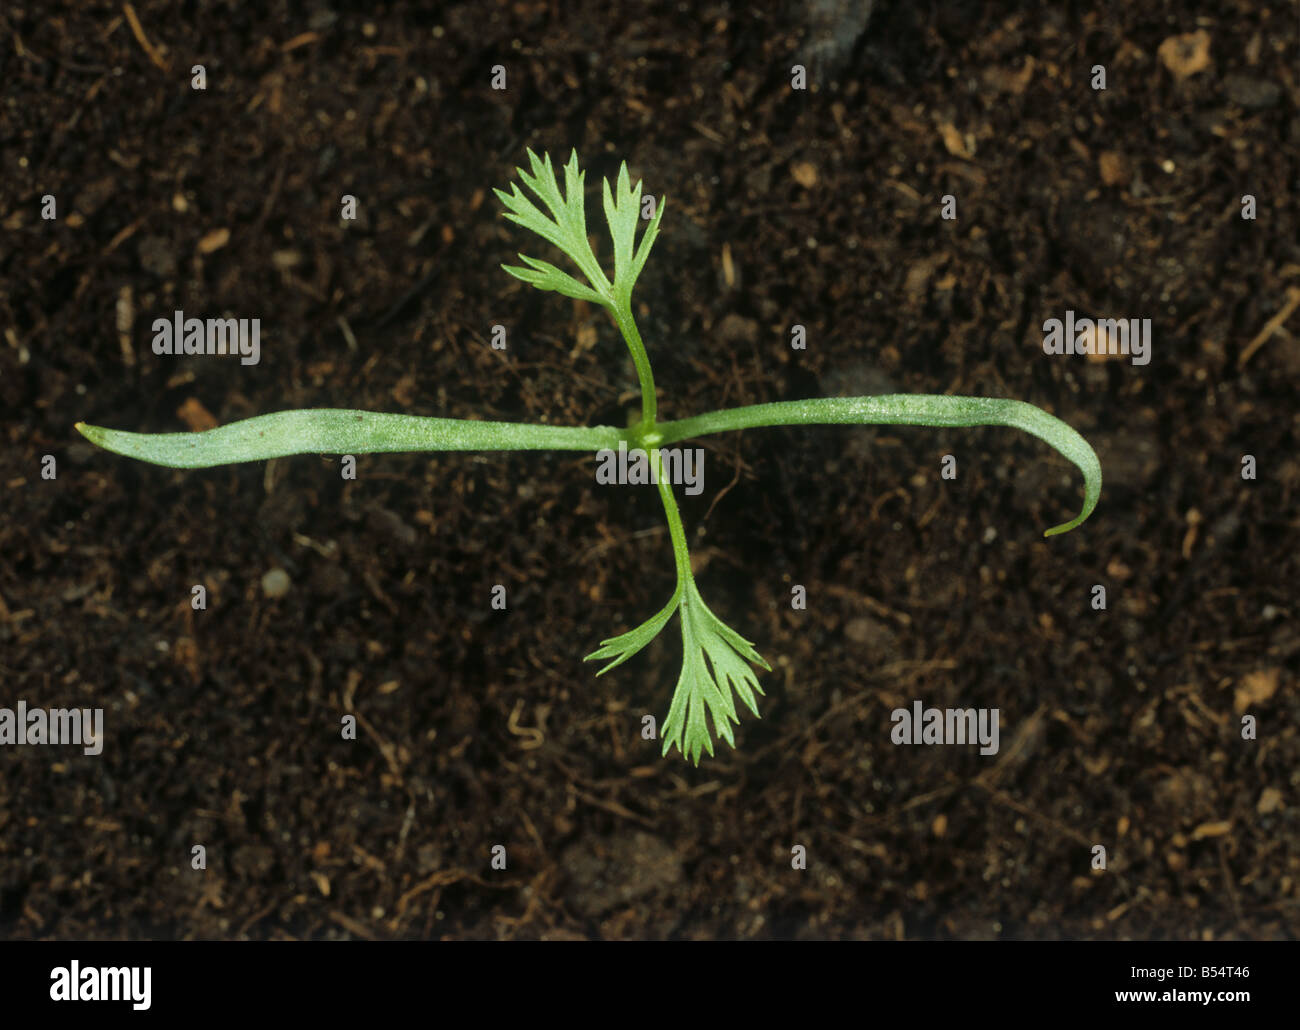 Pheasants eye Adonis annua seedling with early true leaves Stock Photo